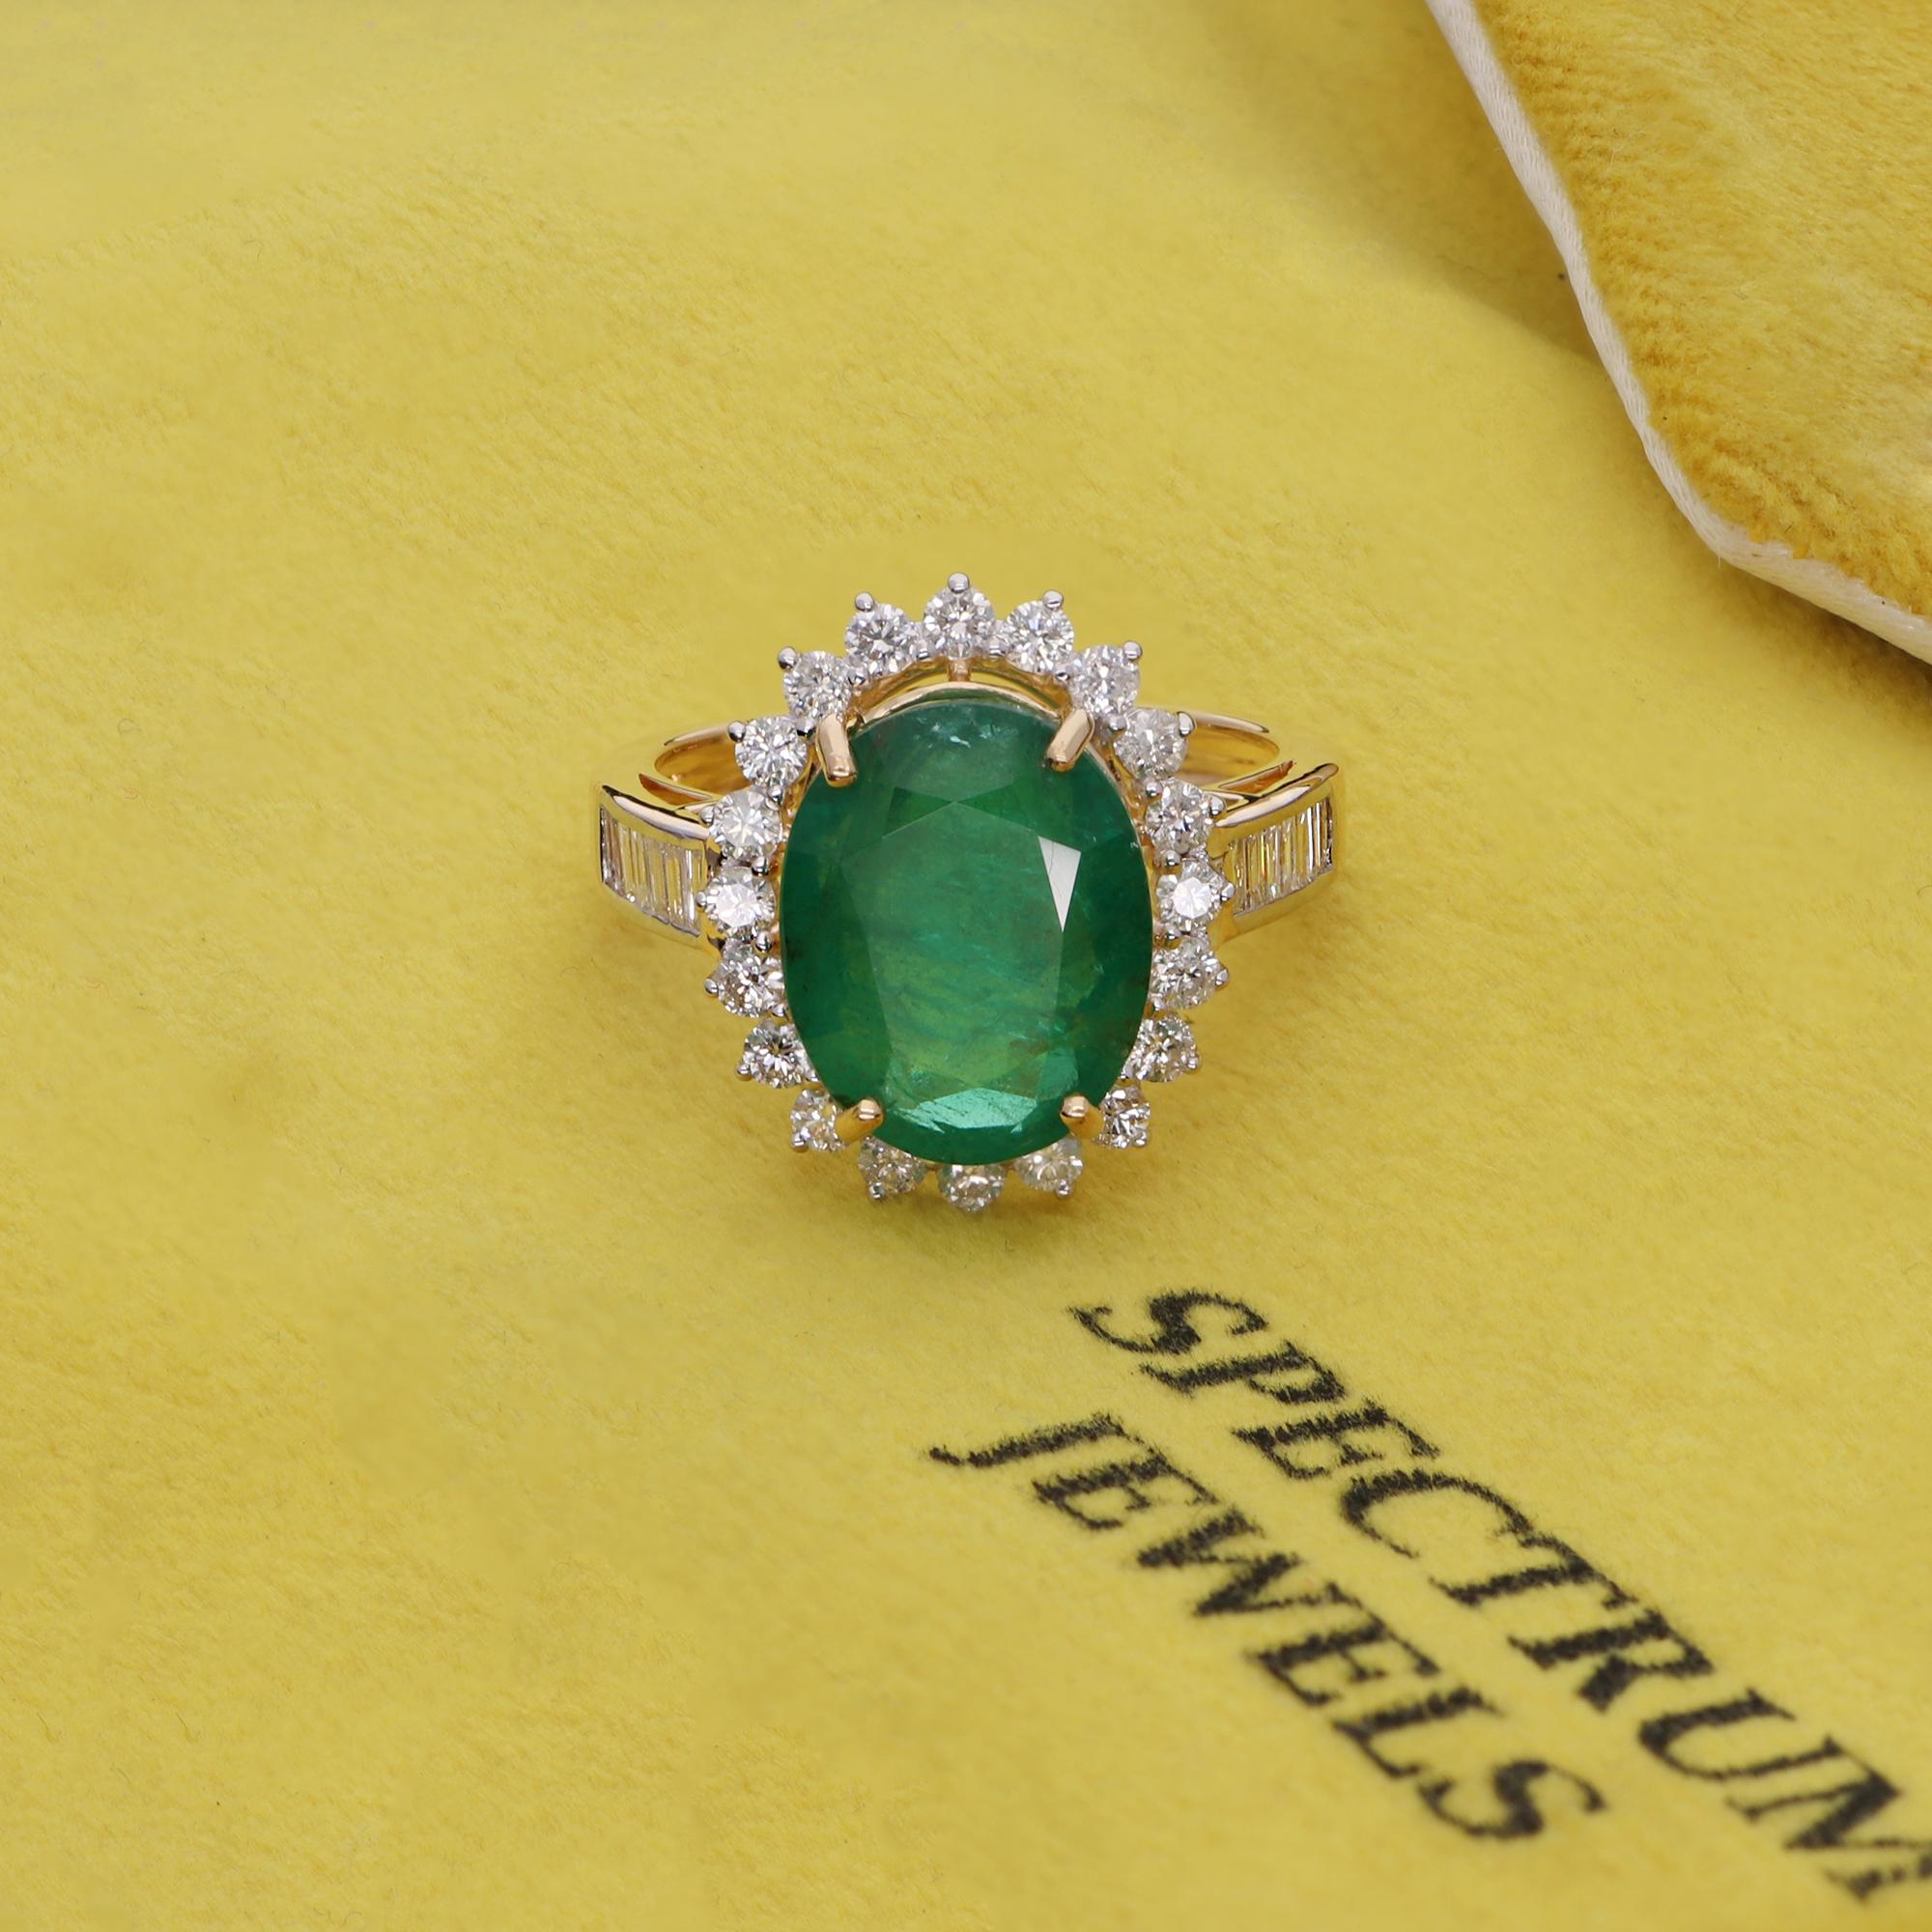 For Sale:  Real Oval Zambian Emerald Gemstone Cocktail Ring Diamond 18k Yellow Gold Jewelry 4